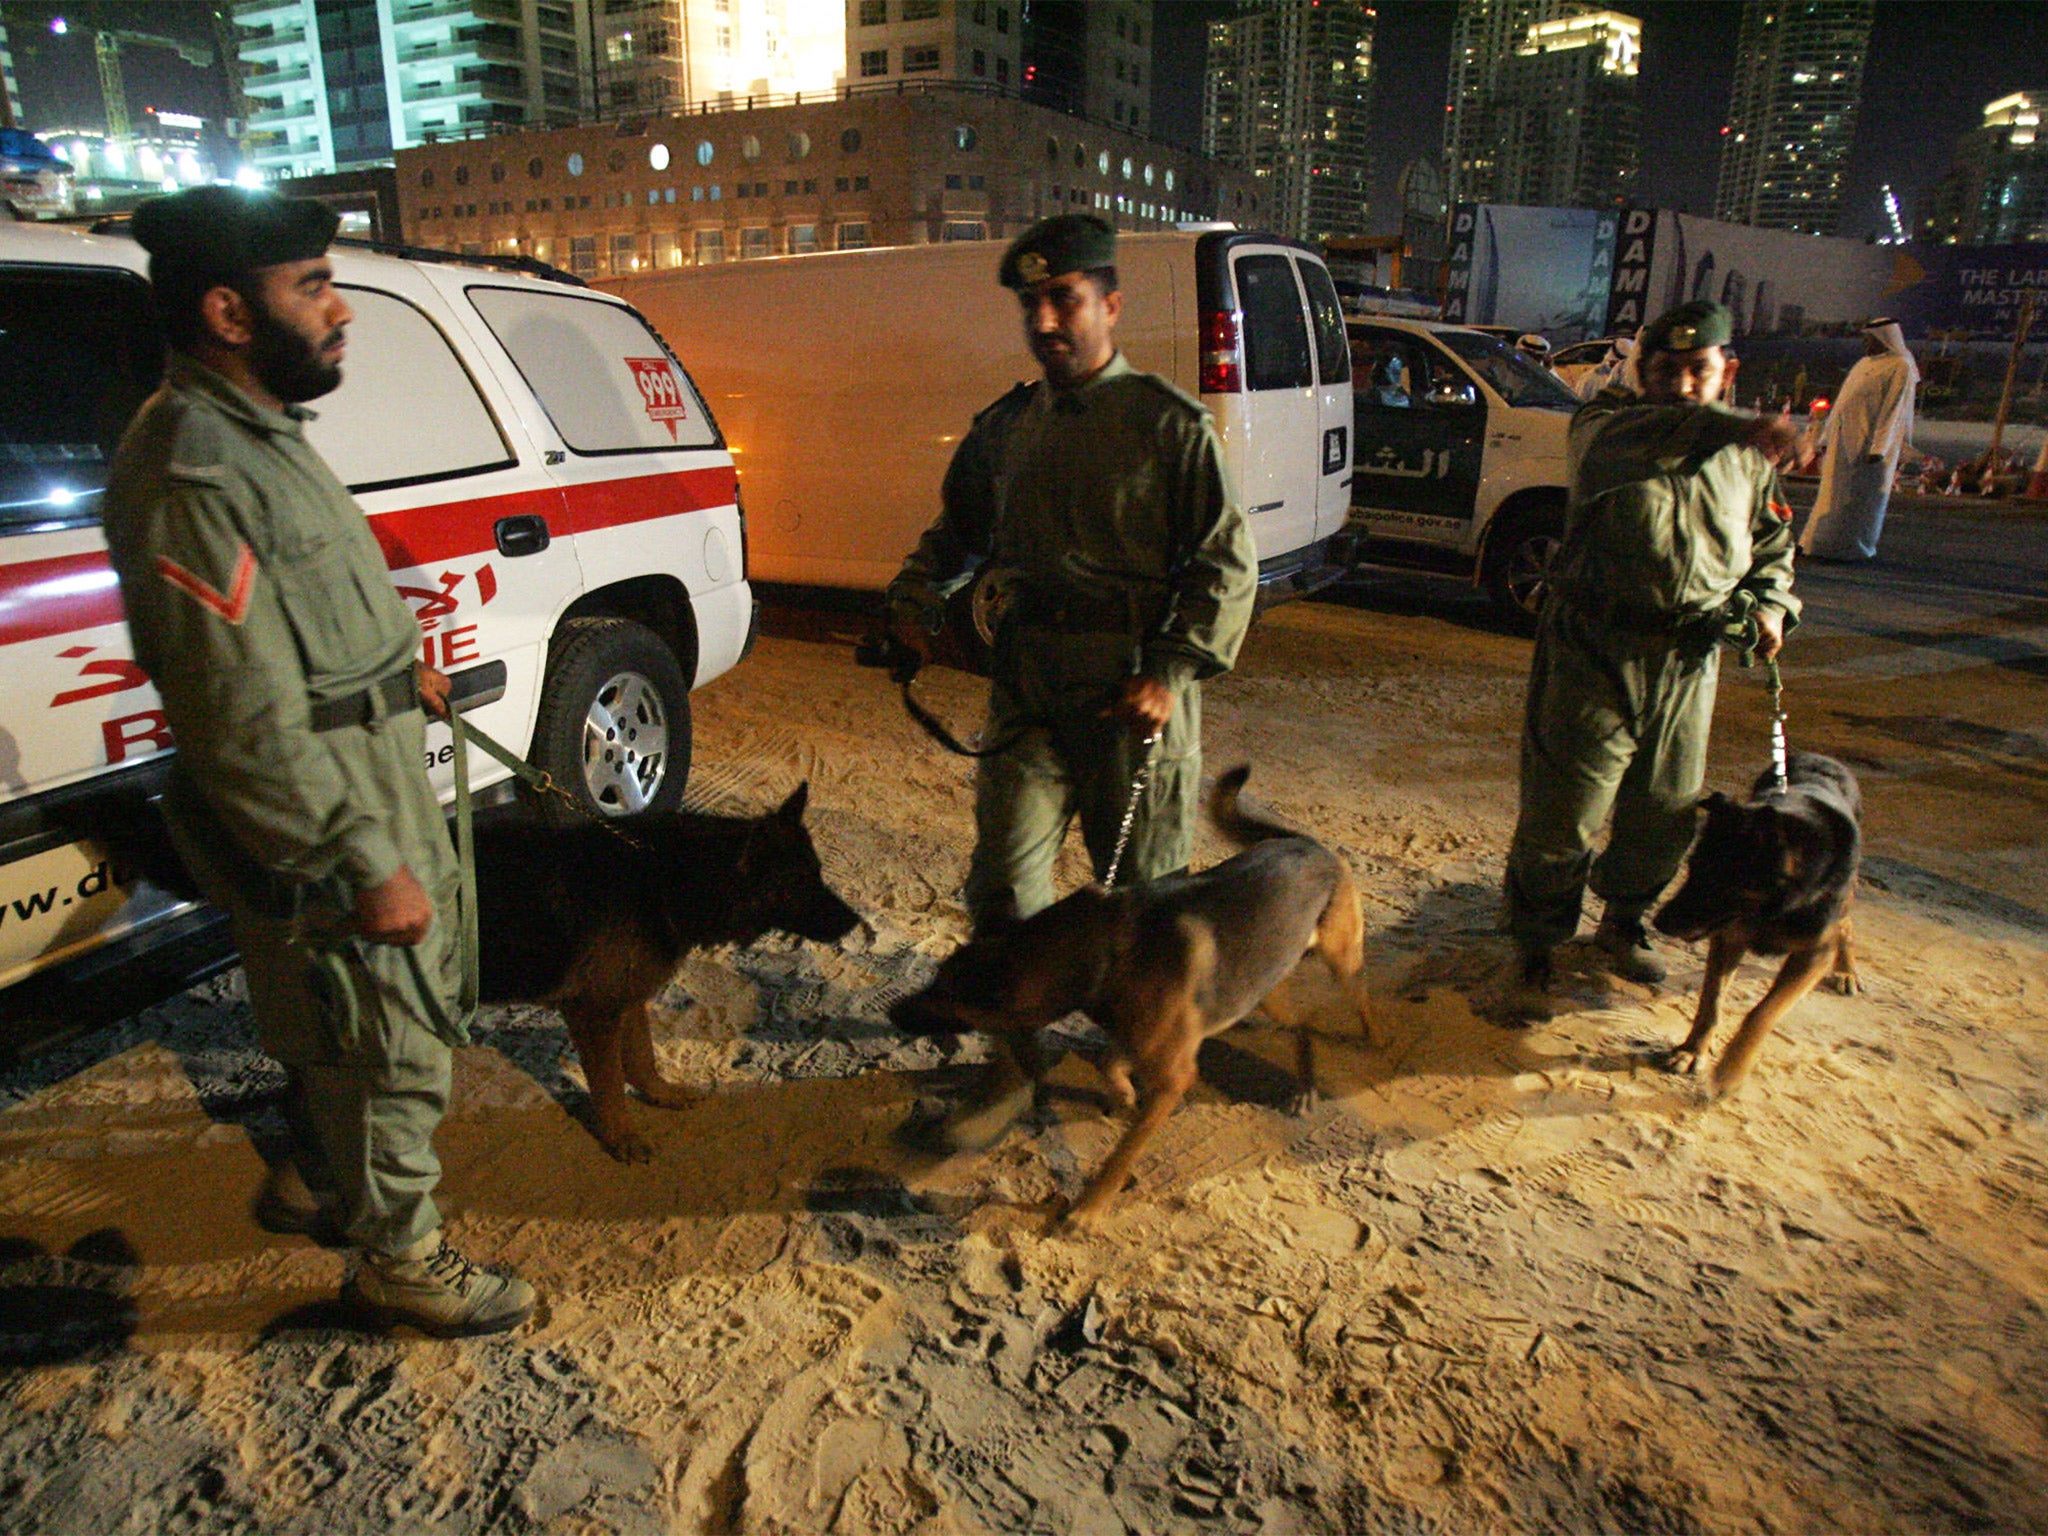 Dubai police have been widely accused of human rights abuses